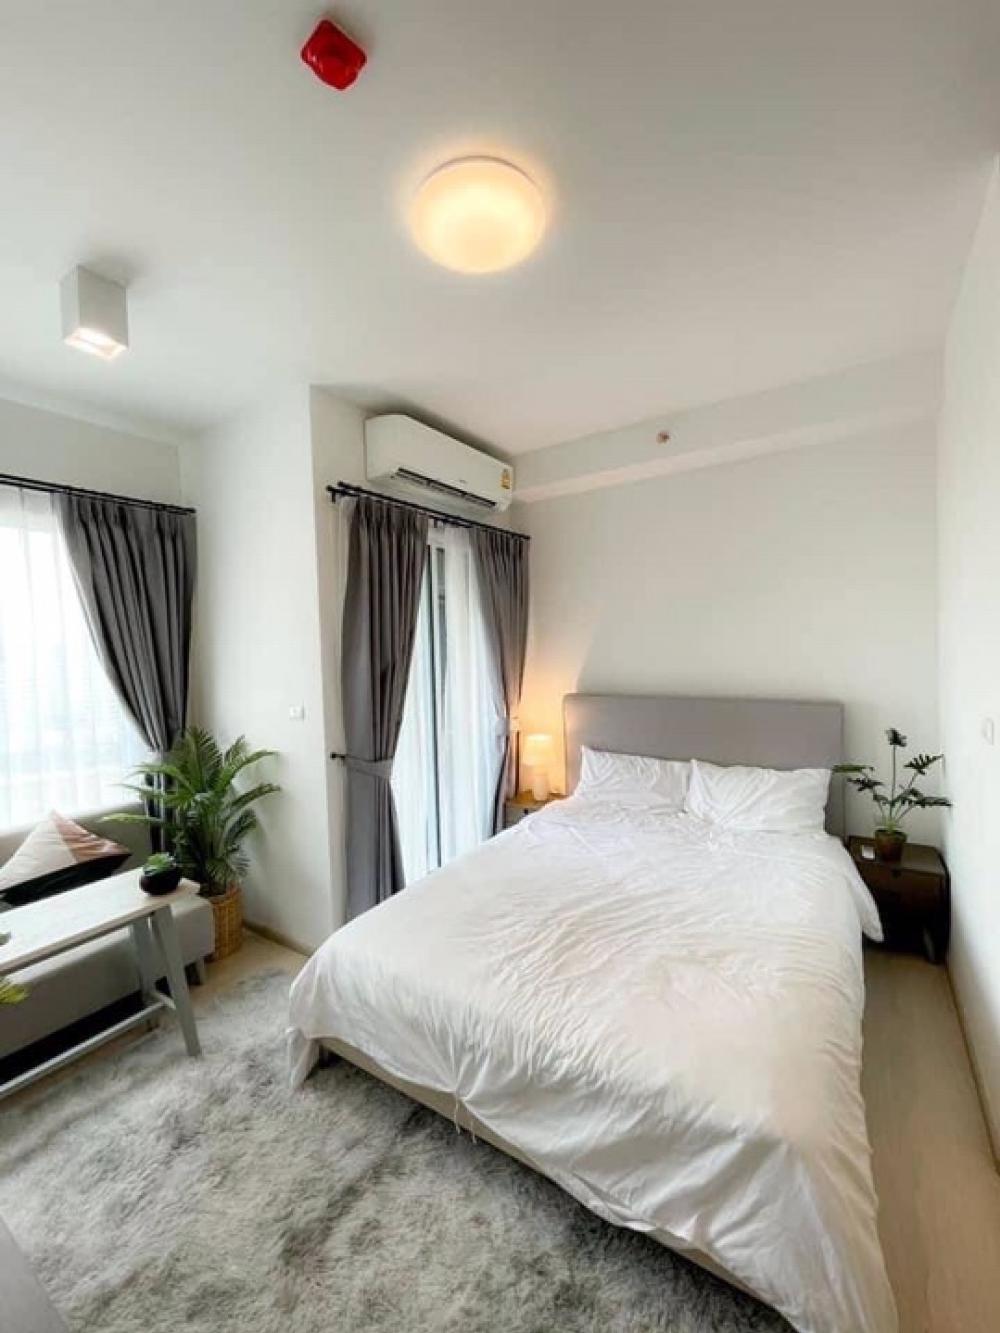 For RentCondoRatchadapisek, Huaikwang, Suttisan : LC-R585 Condo for rent, Chapter One, Eco Ratchada-Huay Kwang, studio room, Building H, 14th floor (ready to move in), area 23 sq.m., studio room, 1 bathroom, good view, near MRT Huai Khwang, near the parking lot. Car near the central area 📌 Building H abo